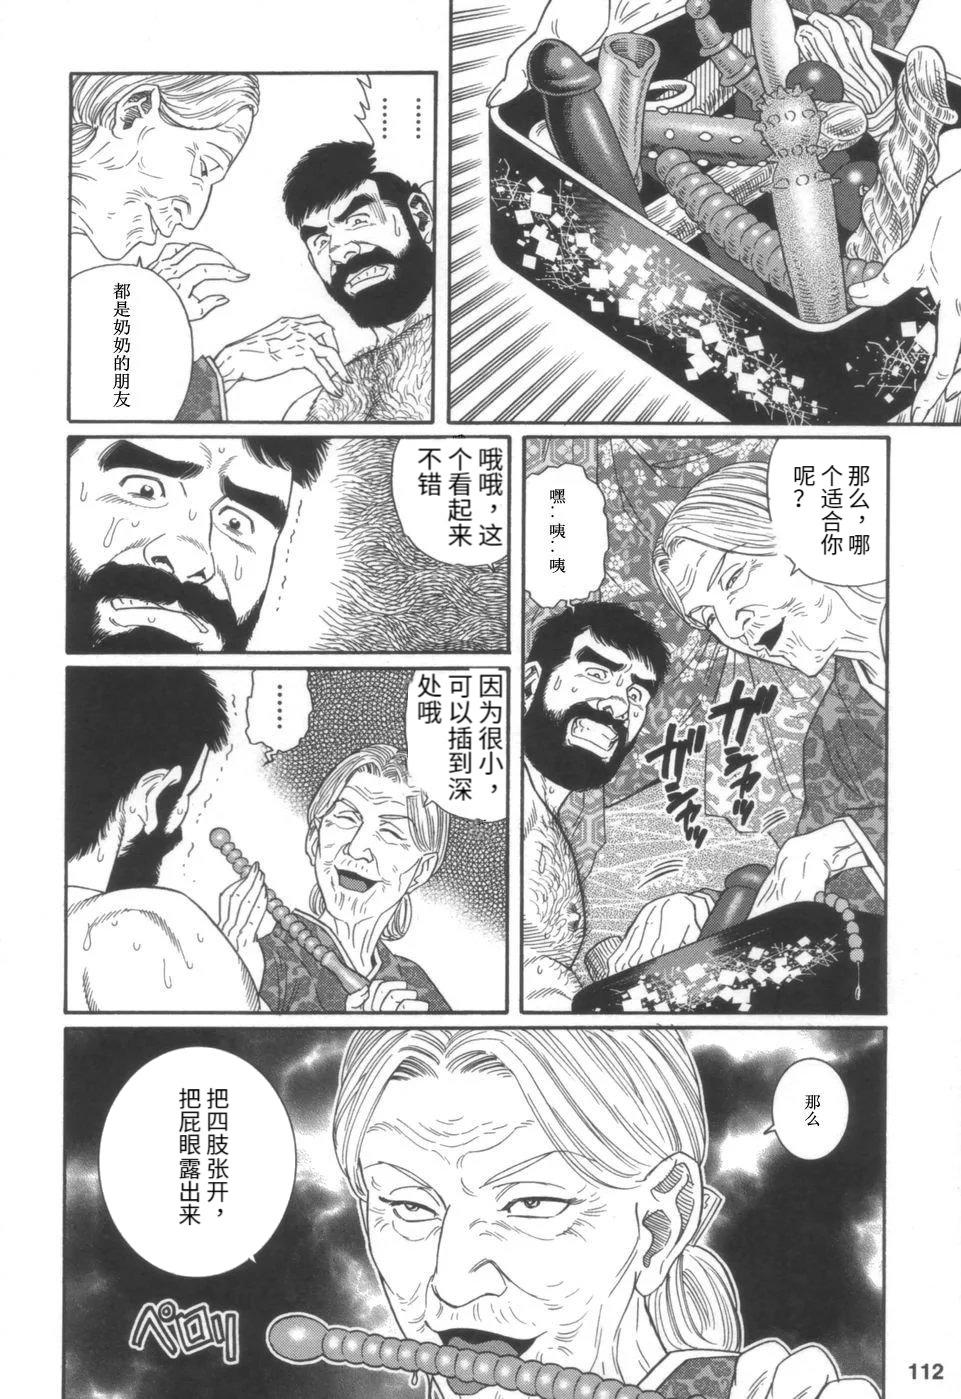 The Gedou no Ie Joukan | 邪道之家 Vol. 1 Ch.4 Leaked - Page 6